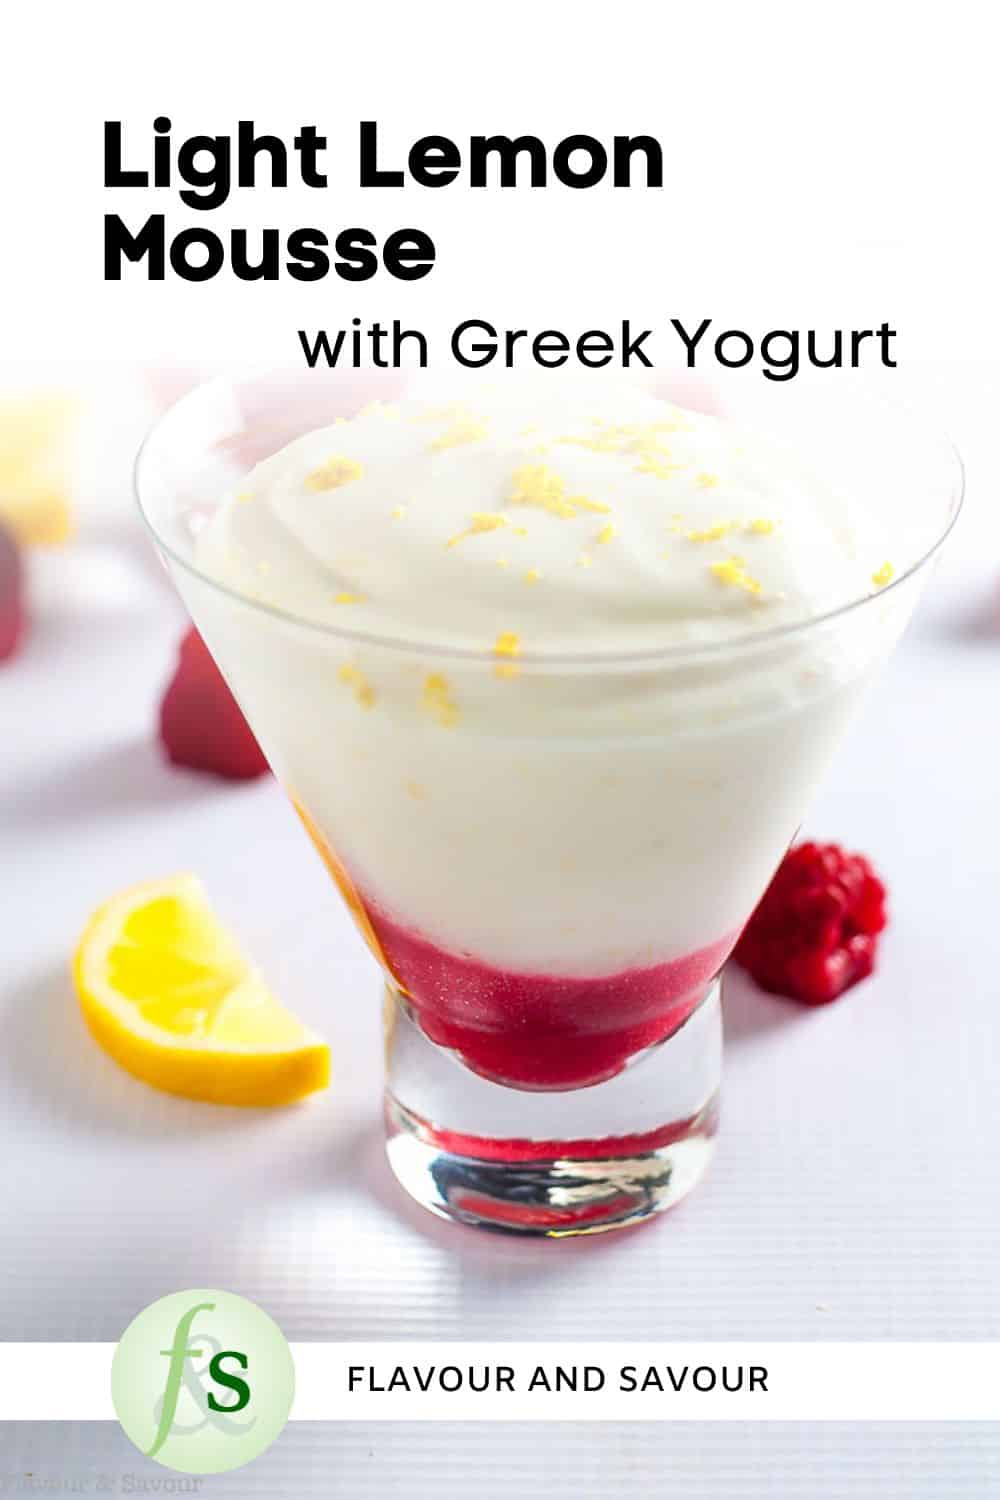 Image with text for Light Lemon Mousse with Greek yogurt.